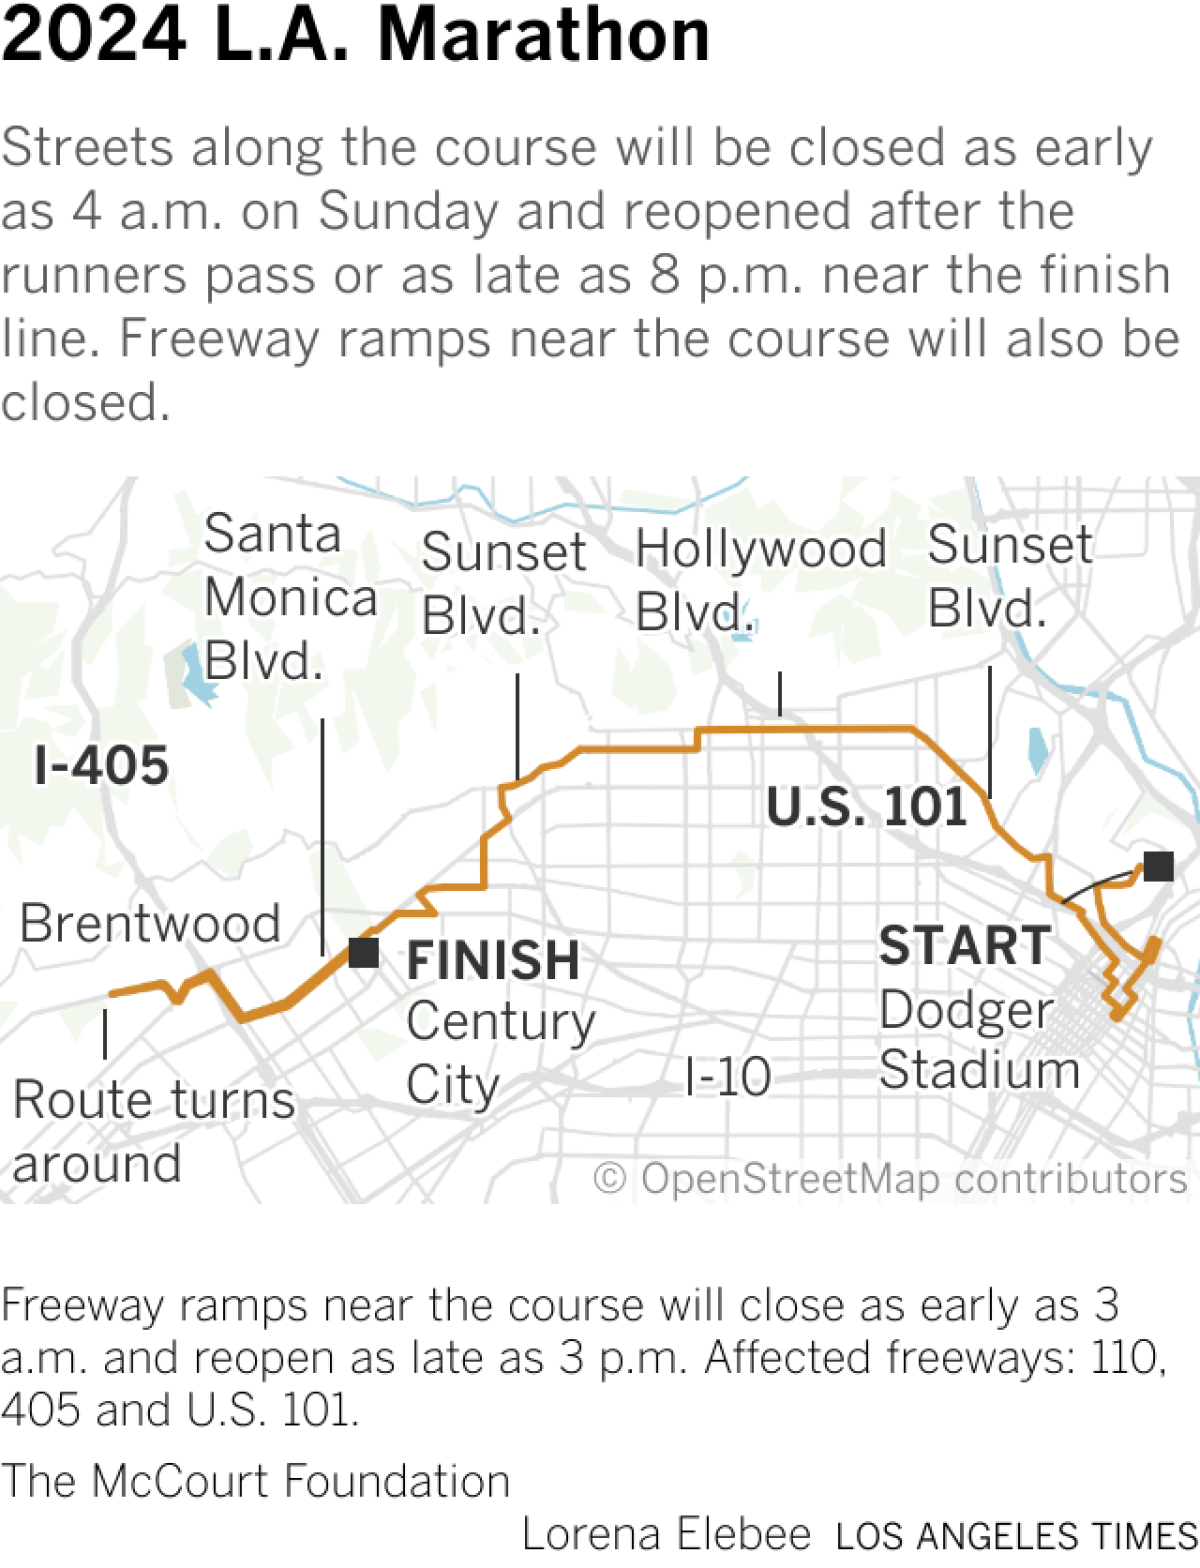 Map shows the Los Angeles Marathon 2024 route which starts in downtown Los Angeles and turns around at mile 22 in Brentwood.